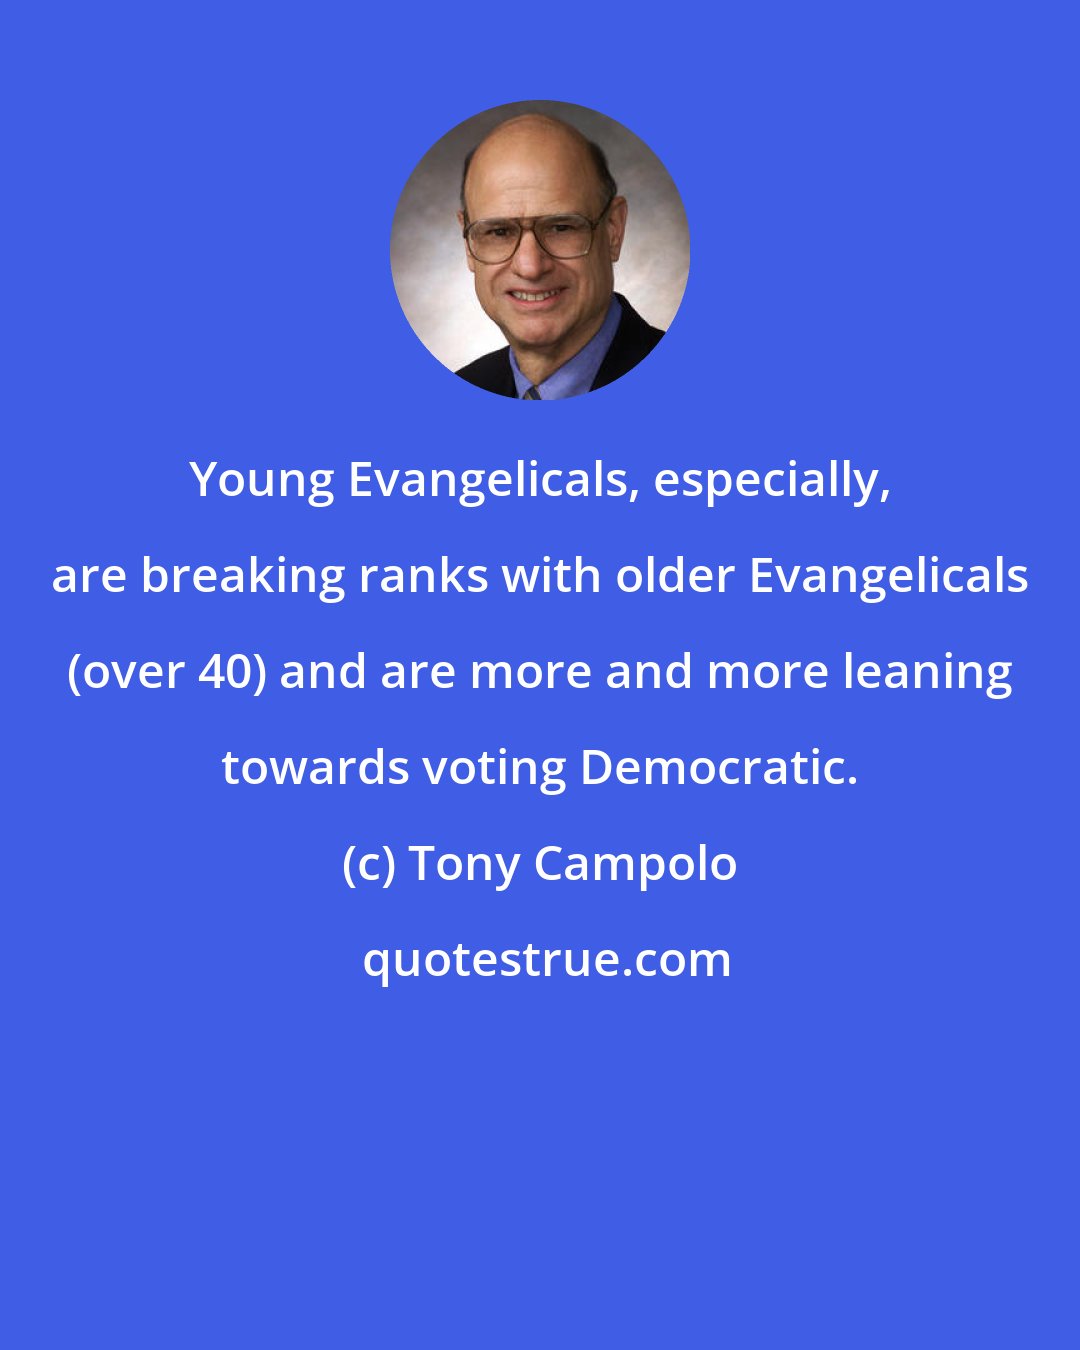 Tony Campolo: Young Evangelicals, especially, are breaking ranks with older Evangelicals (over 40) and are more and more leaning towards voting Democratic.